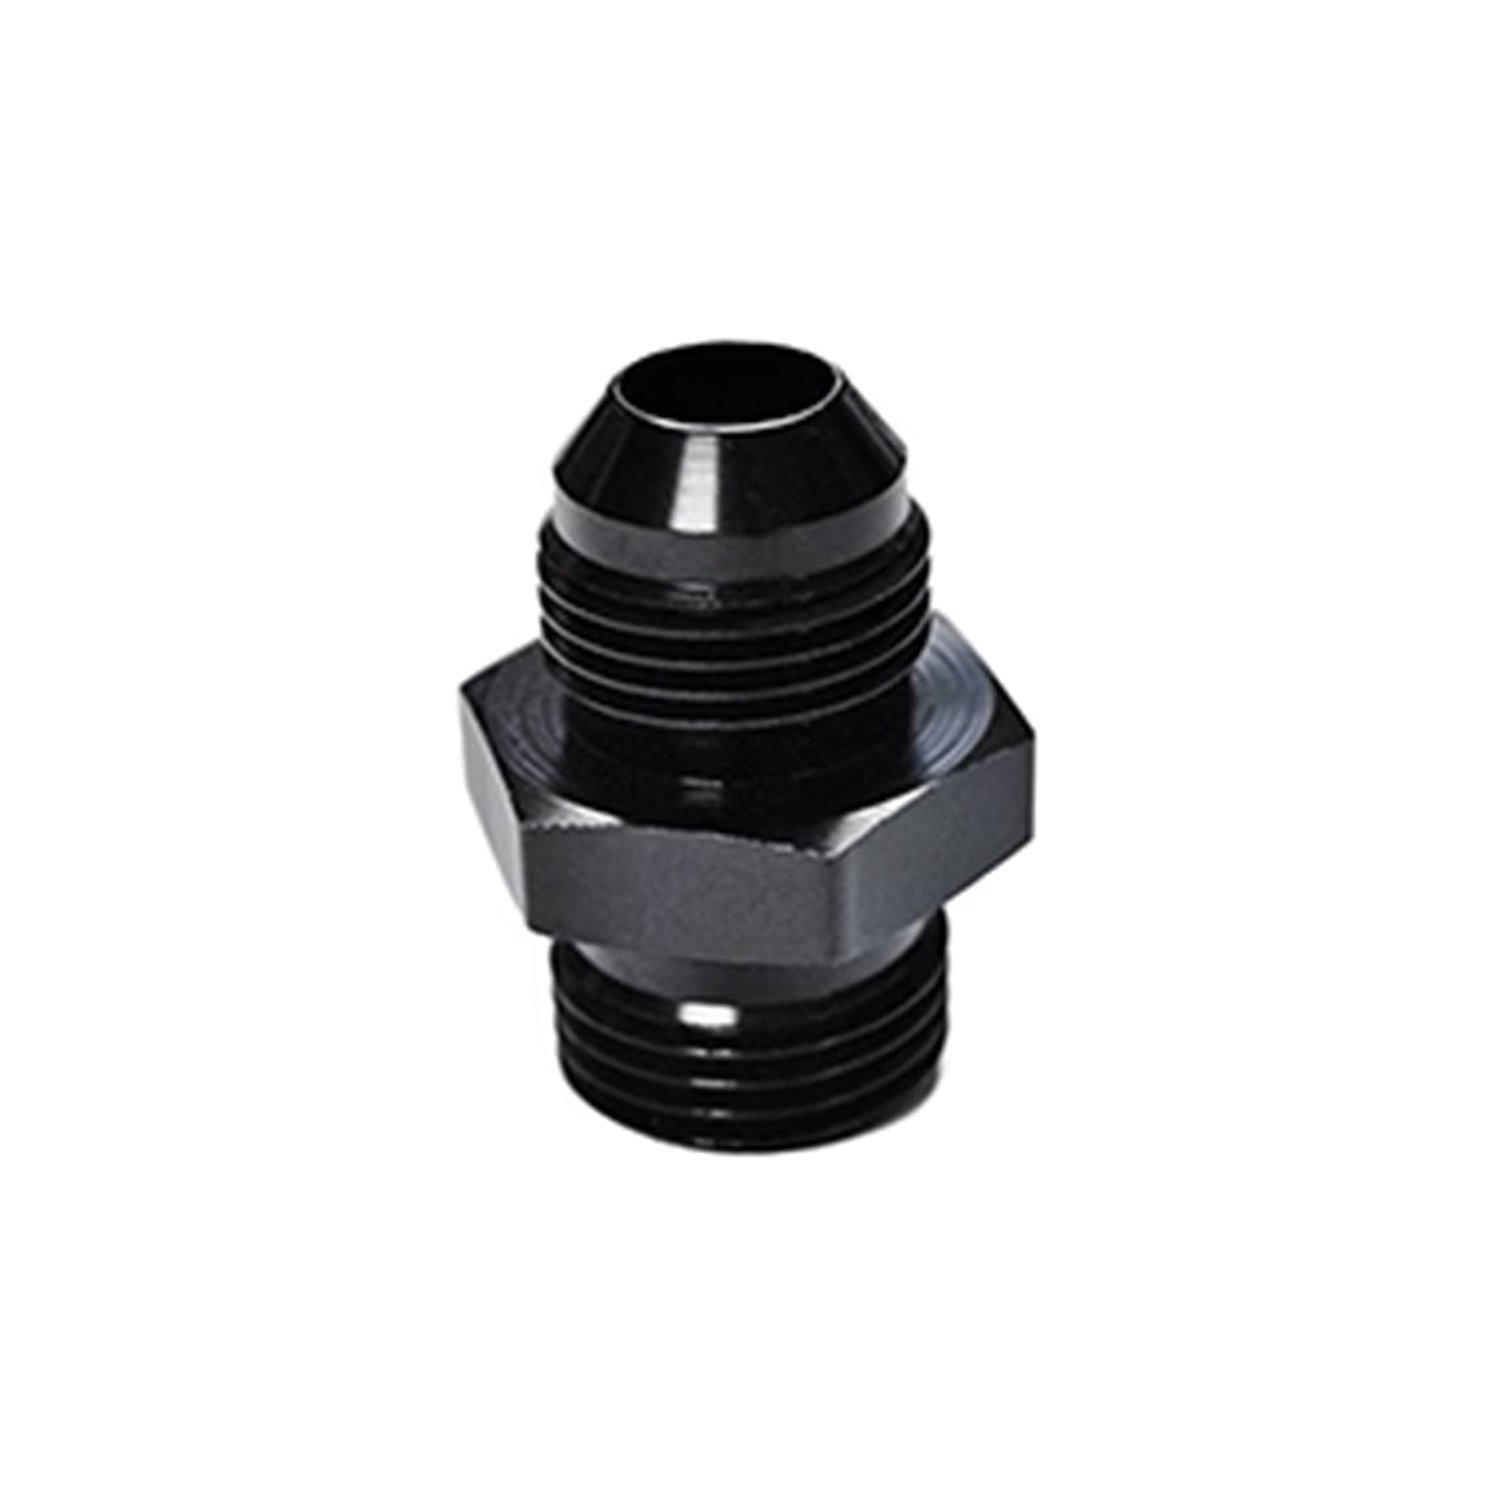 22-NPSM14AN06-00 Adapter Fitting, 1/4 in. NPSM Male to AN06 Male, Straight [Anodized Aluminum]